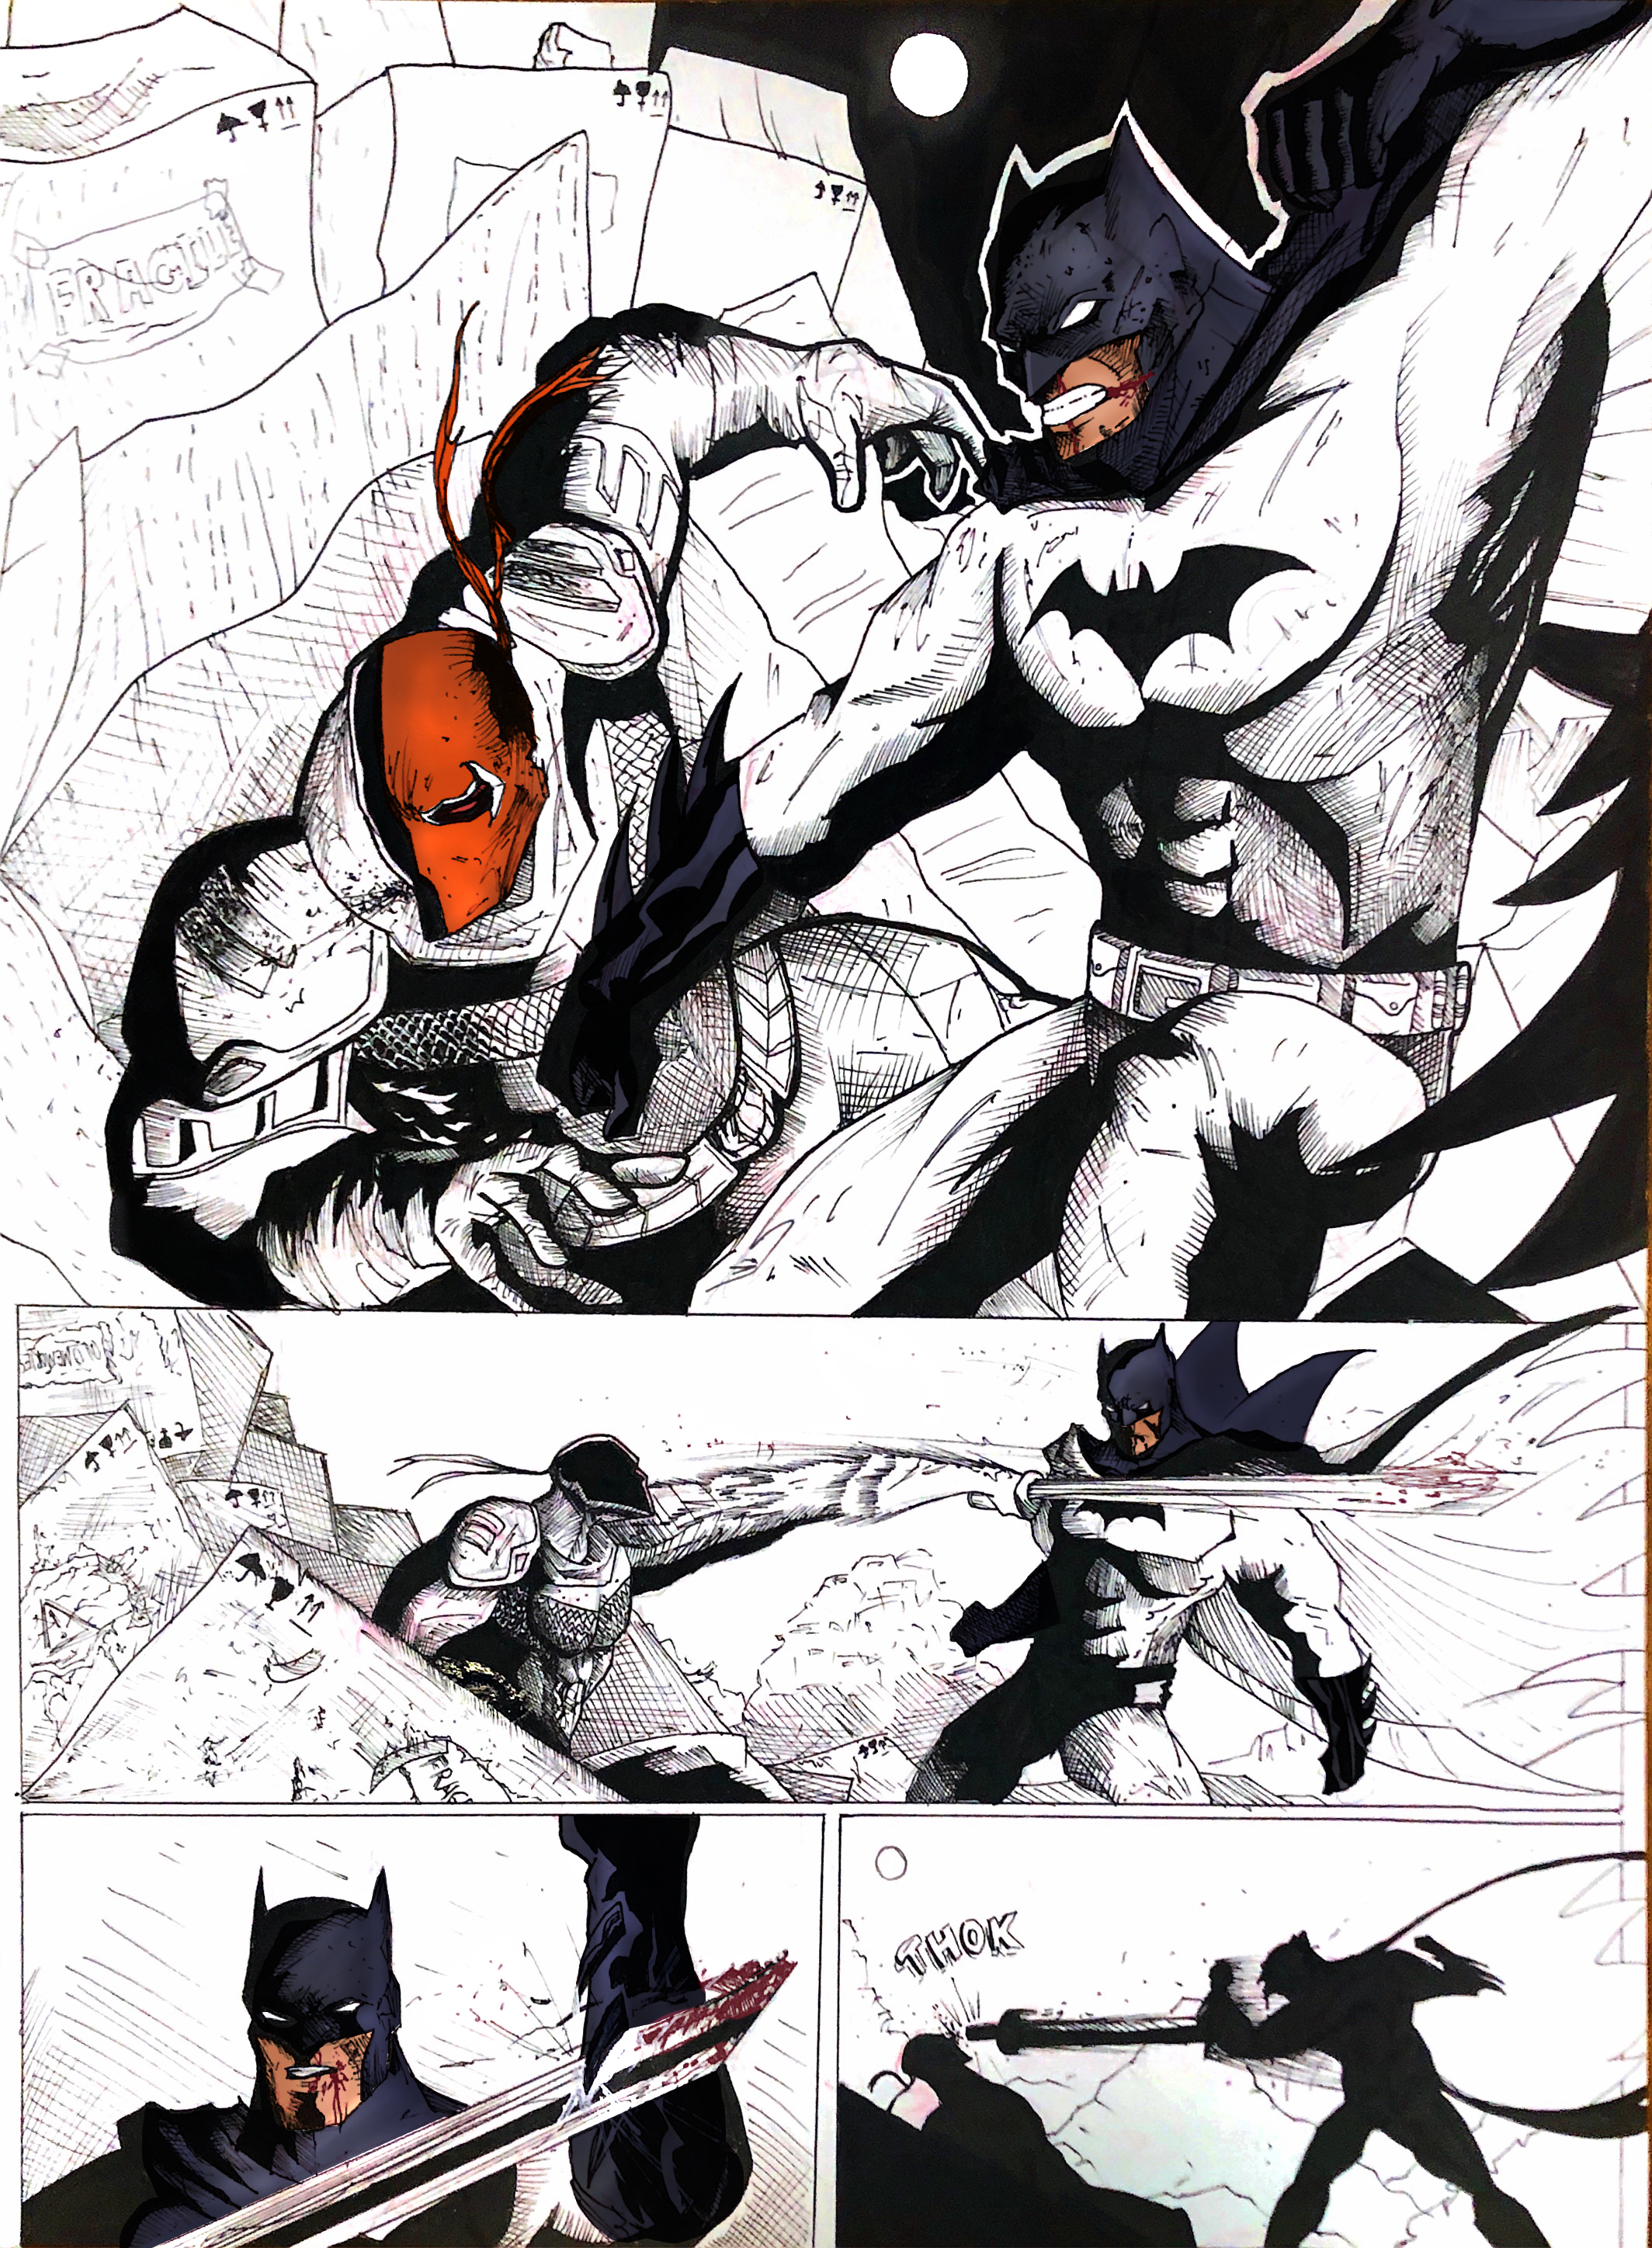 Batman vs Deathstroke (sequential) by reallyiconicartist on DeviantArt